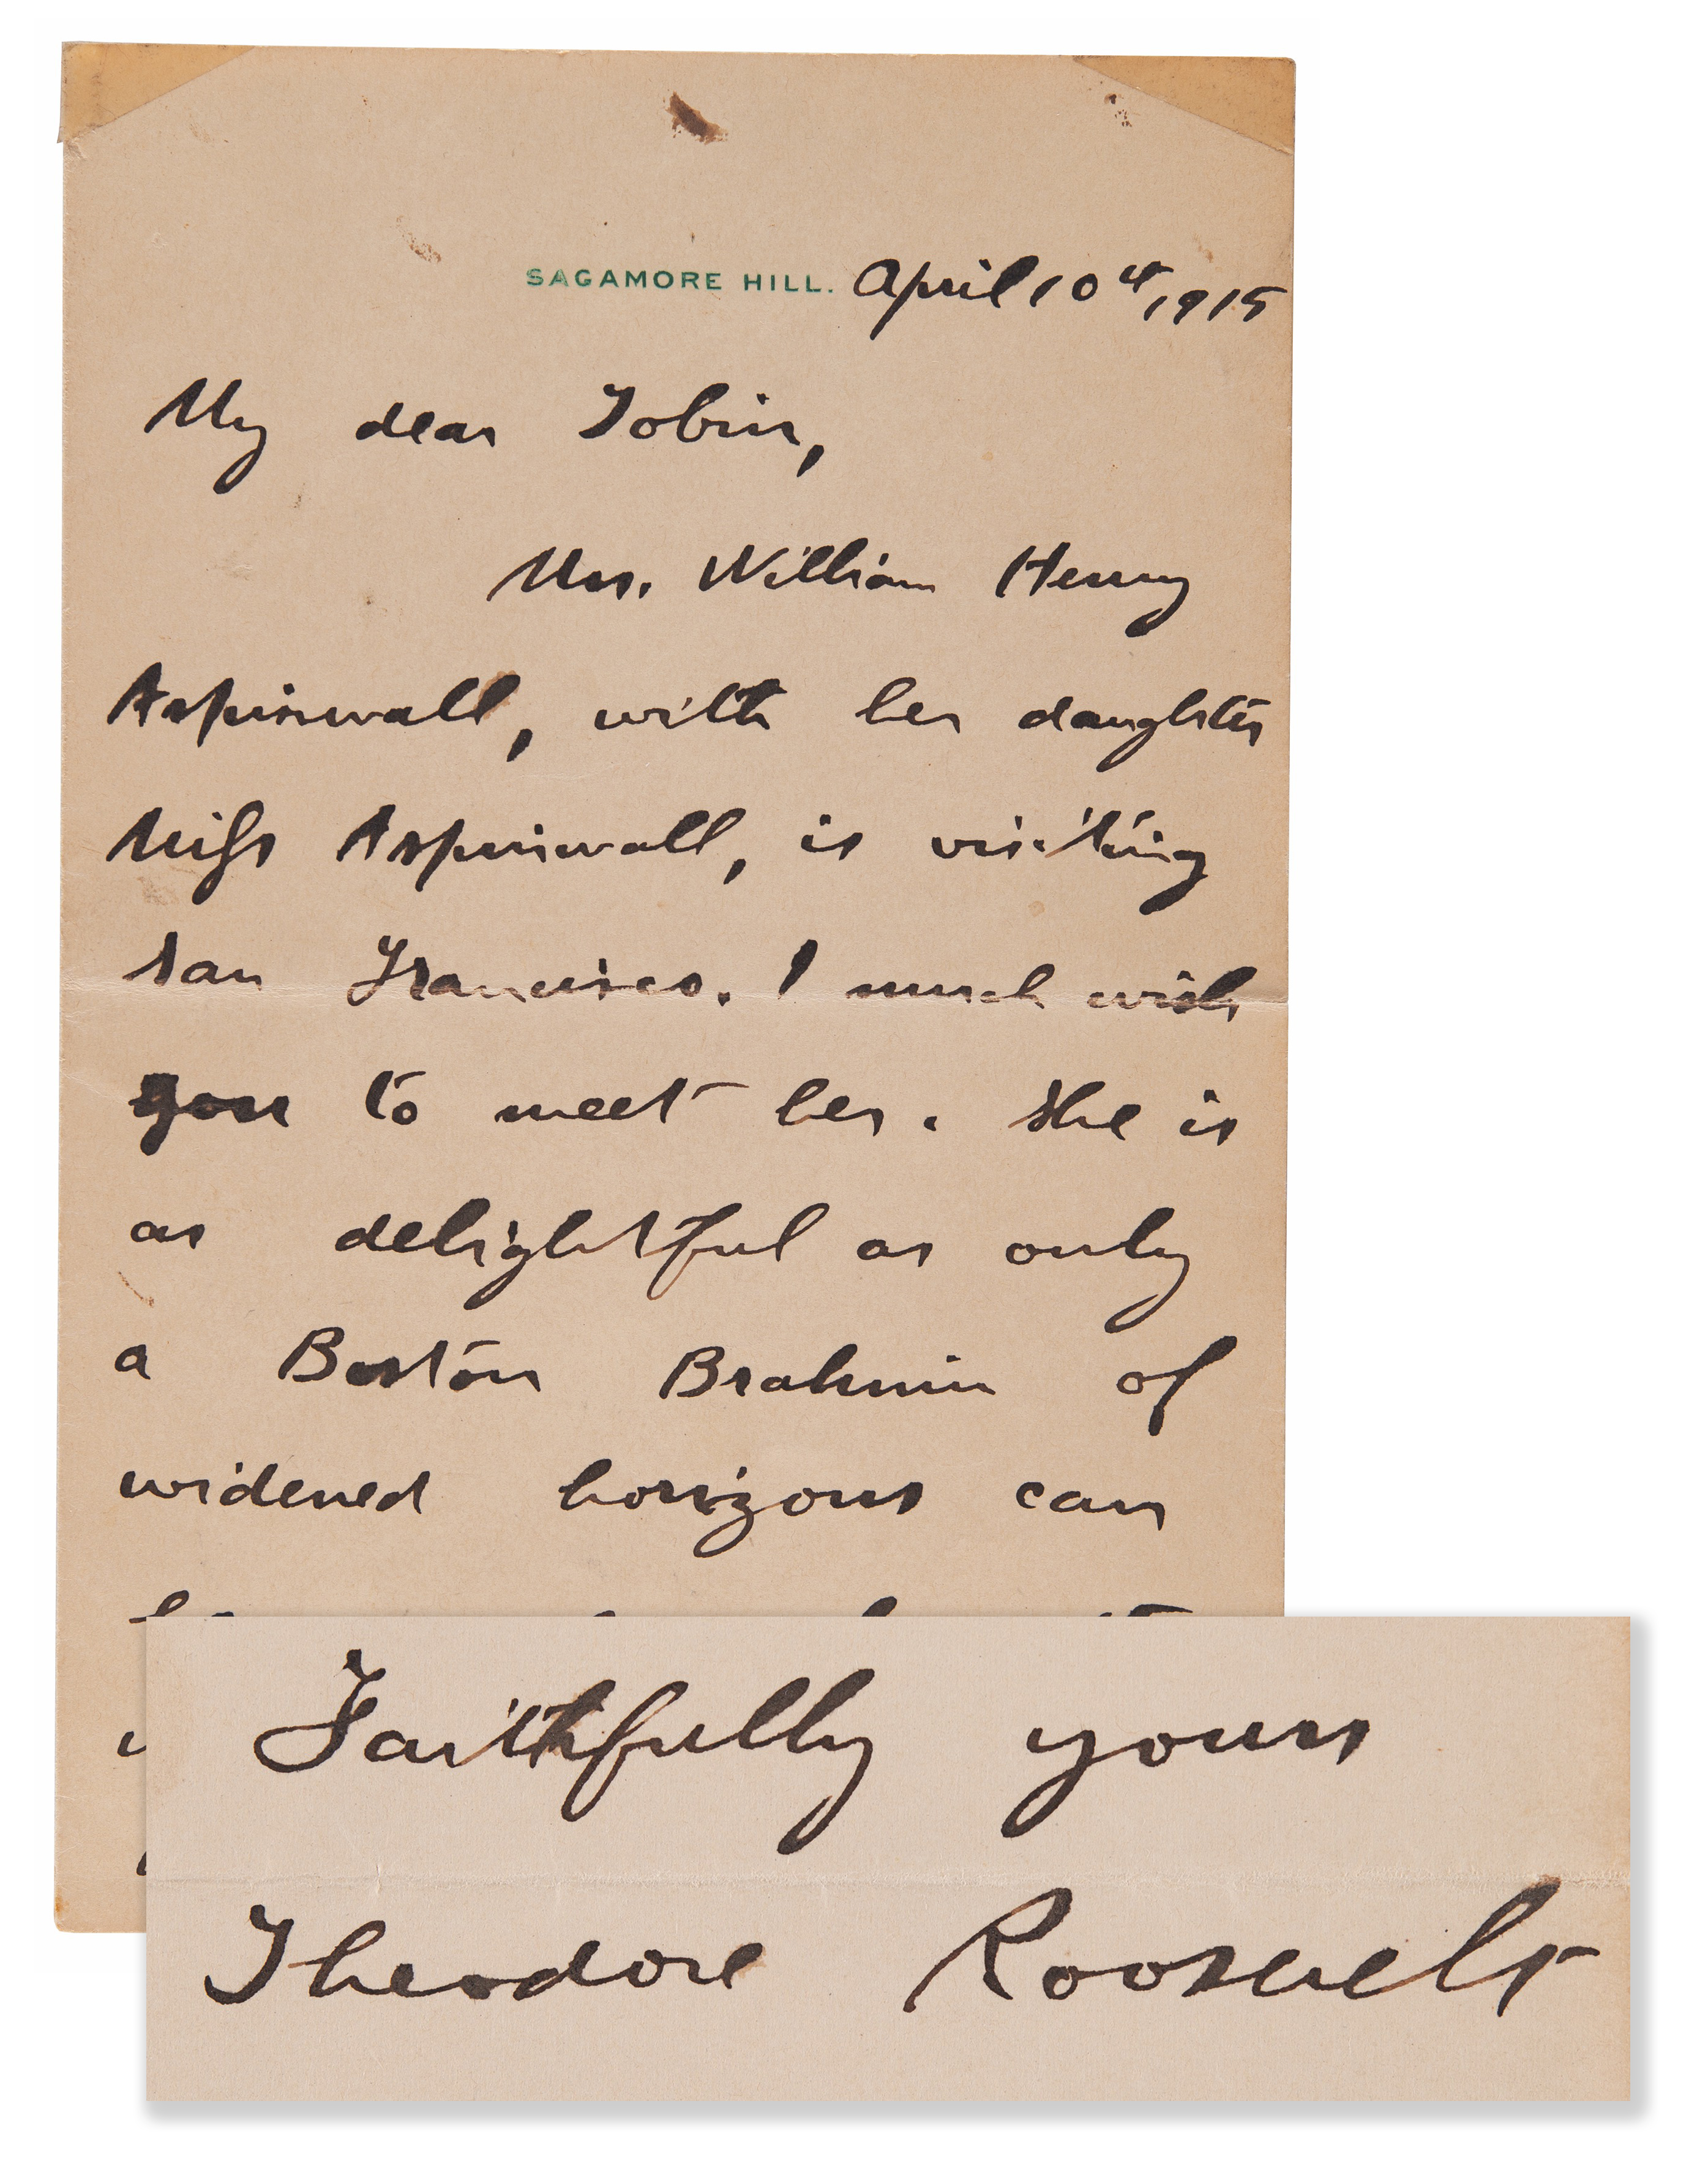 Lot #28 Theodore Roosevelt Autograph Letter Signed - Image 1